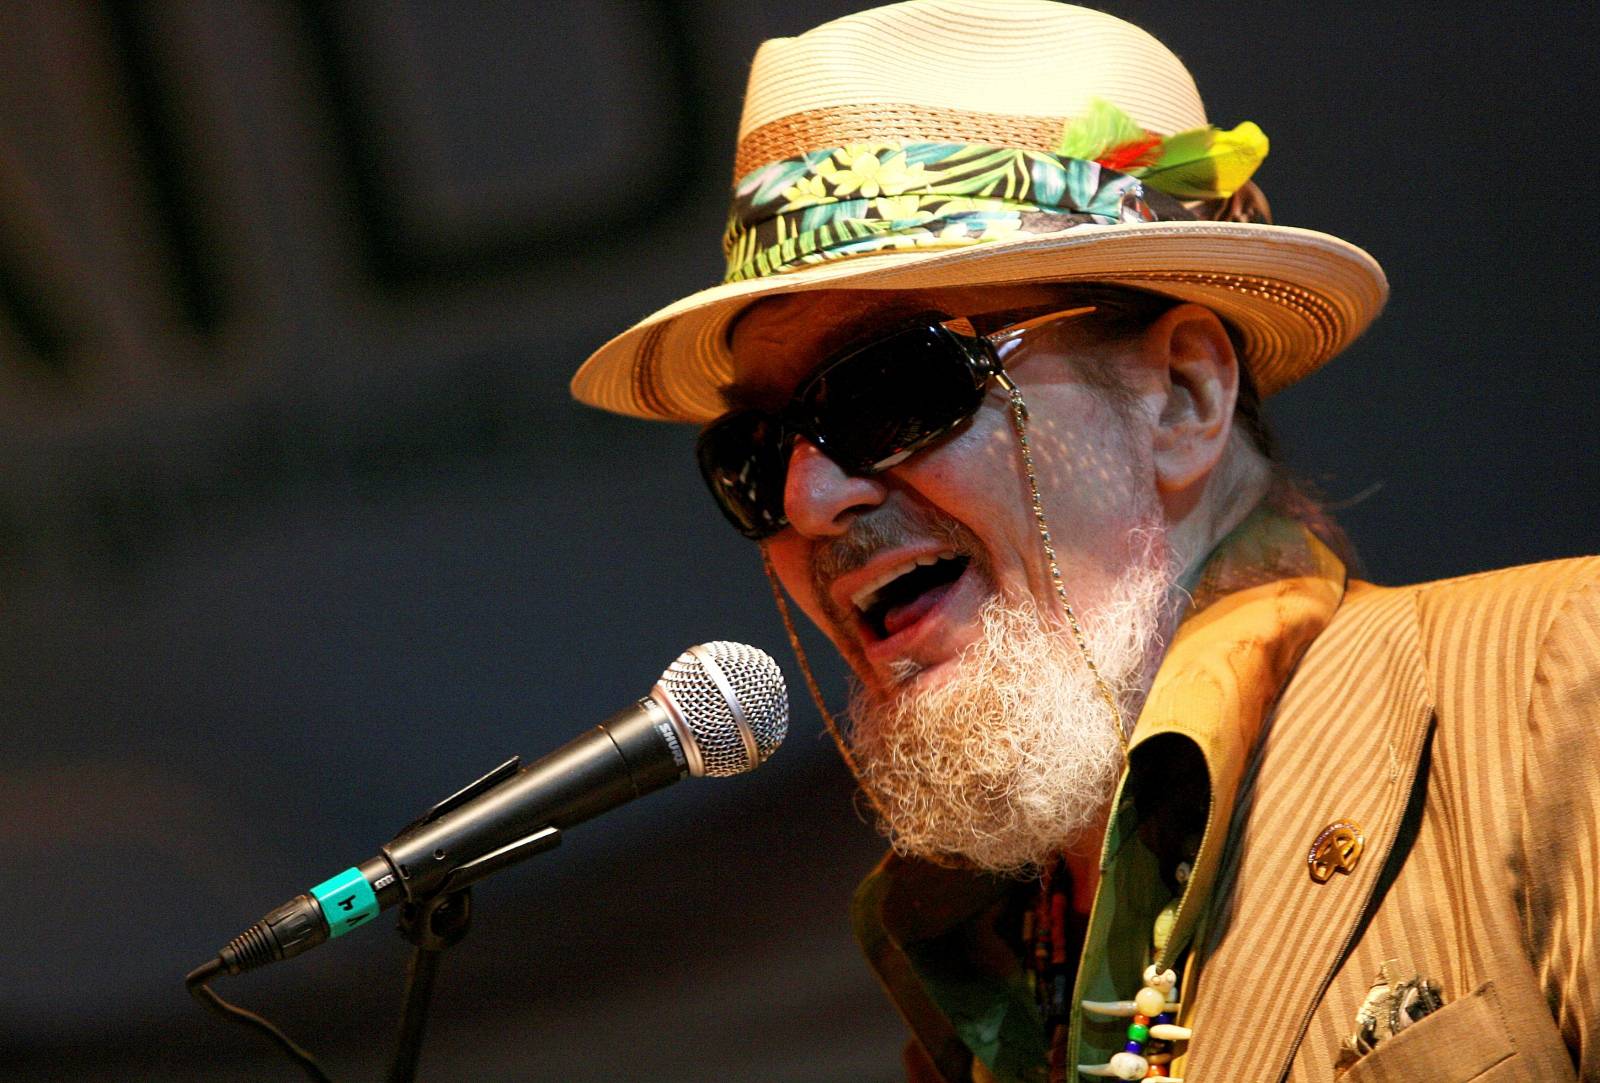 FILE PHOTO: Dr. John sings with The Voice of the Wetlands Allstars during the Gulf Aid benefit concert at Mardi Gras World in New Orleans